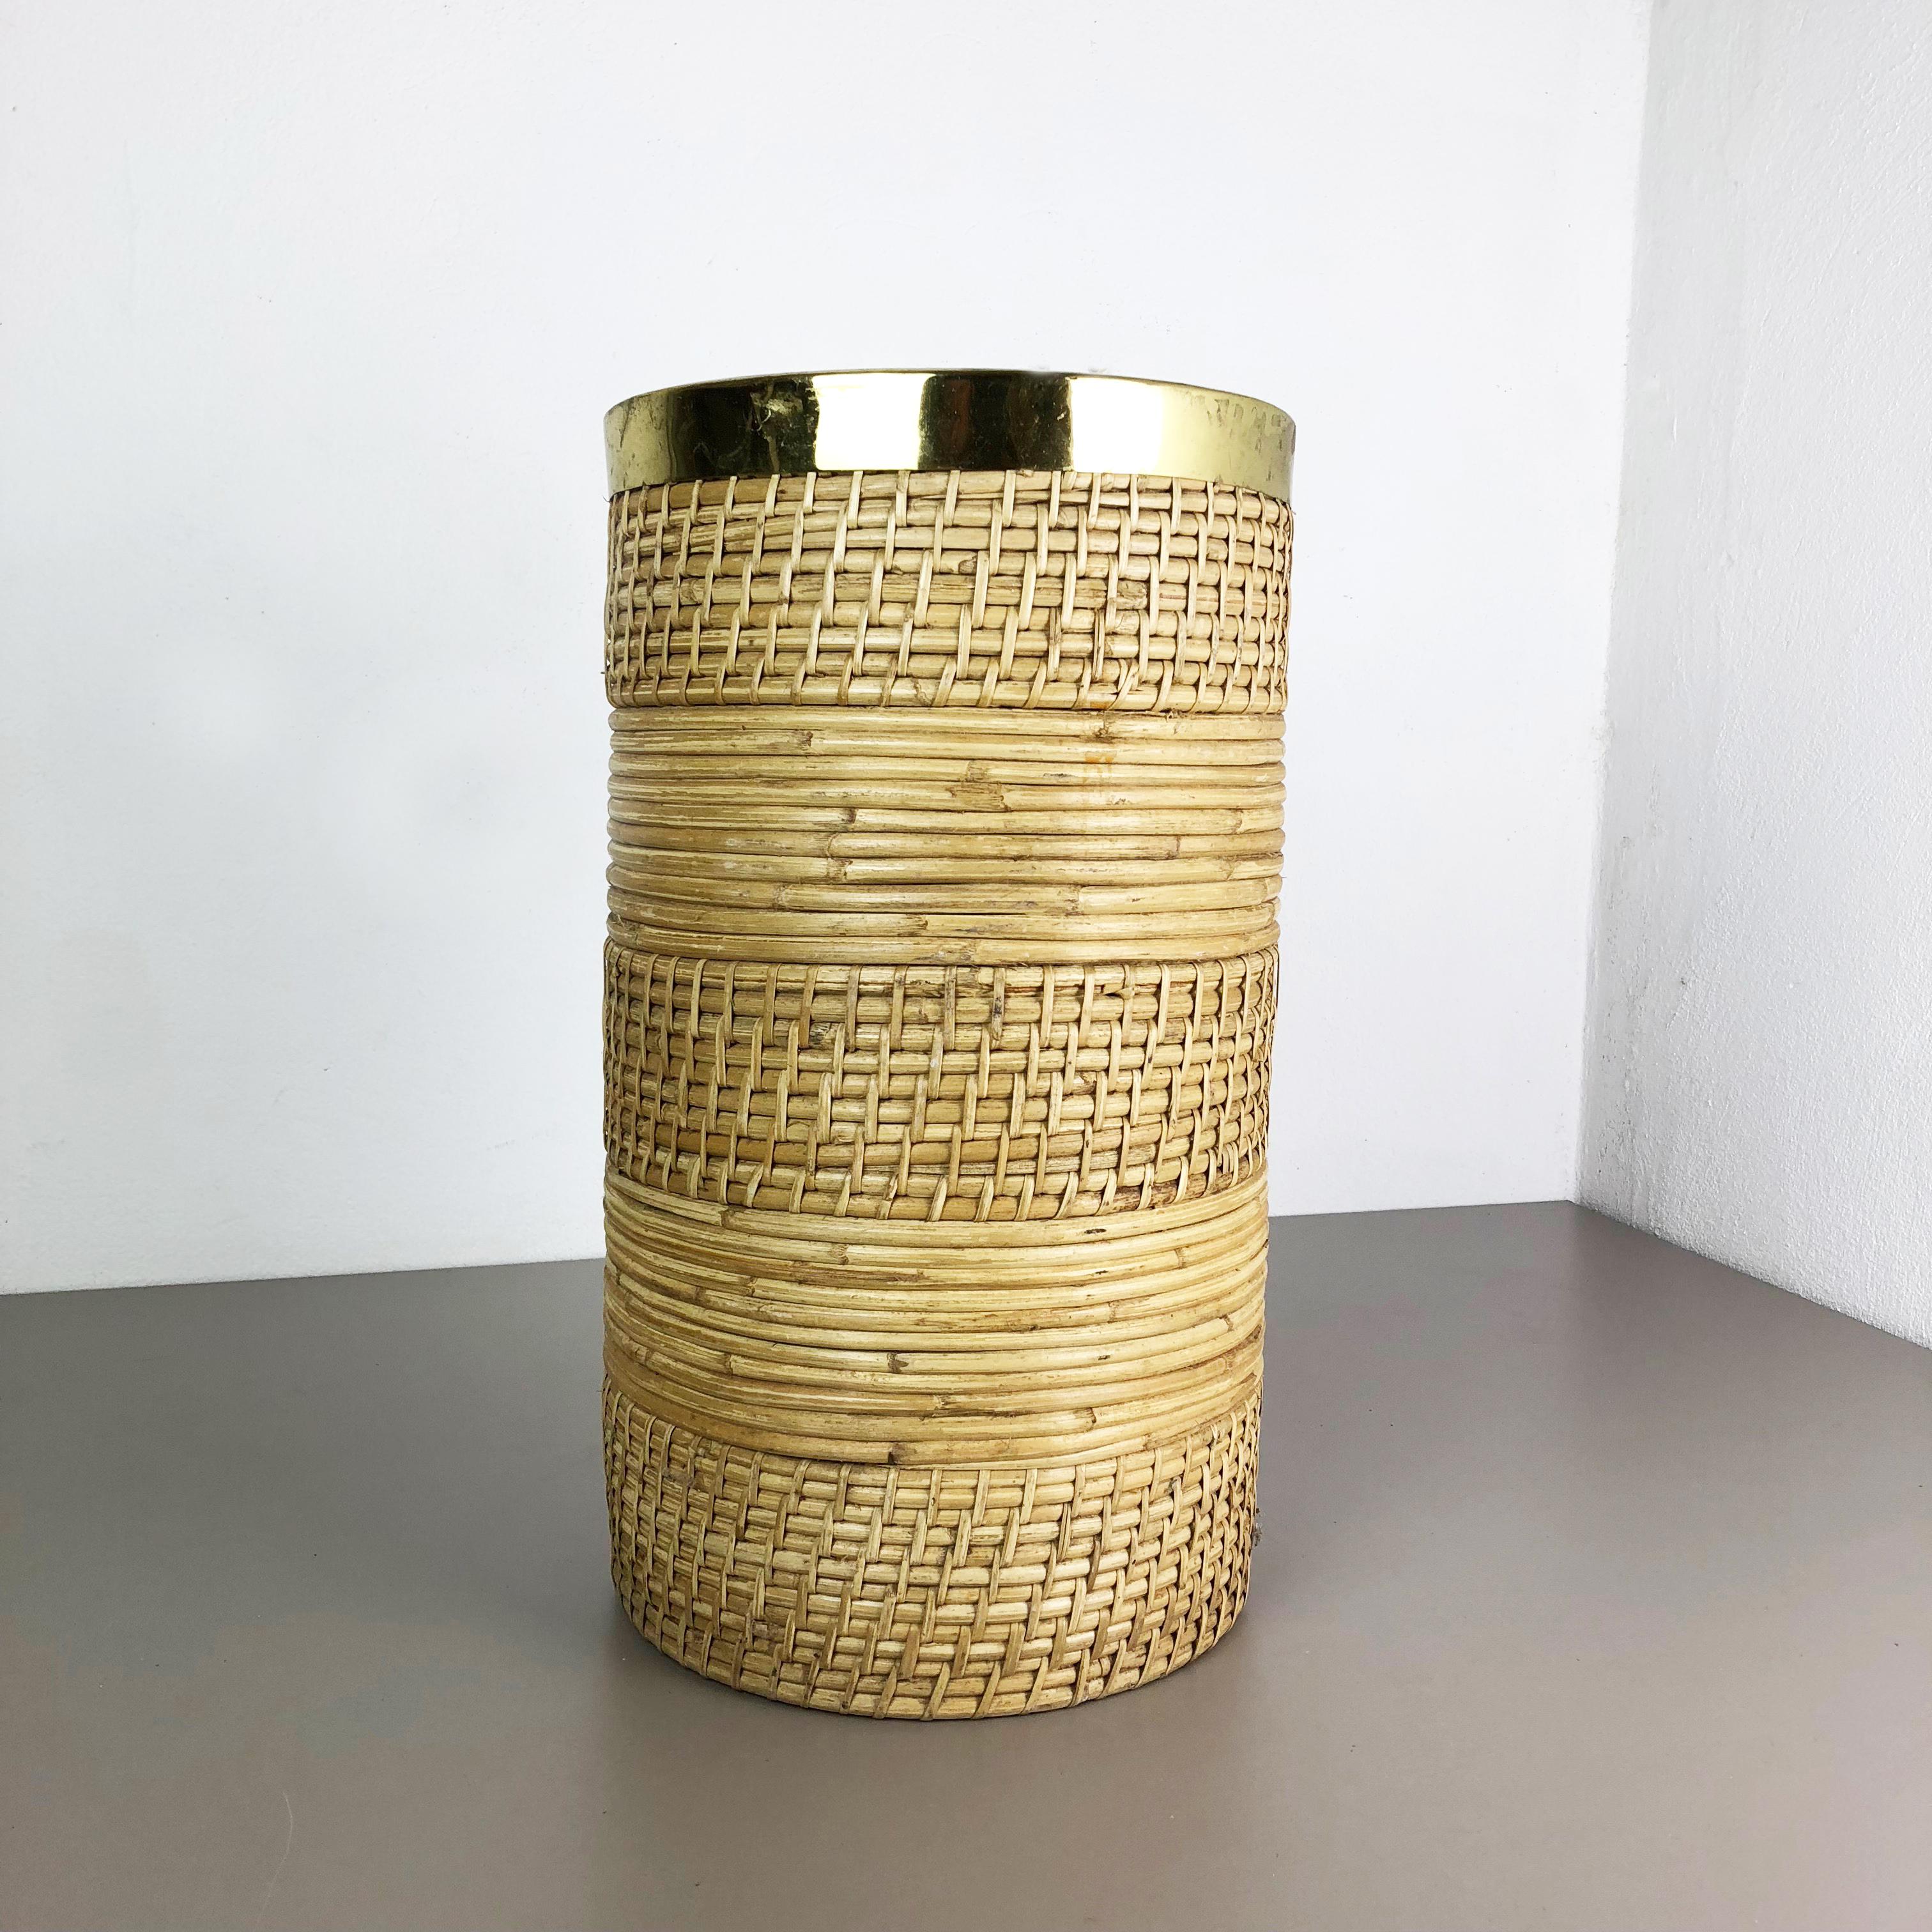 Article: Waste bin paper bin or umbrella stand

Origin: France

Age: 1960s

This original vintage Bauhaus style waste bin paper bin, umbrella Stand was produced in the 1960s in France. It is made of natural rattan with a brass applications at